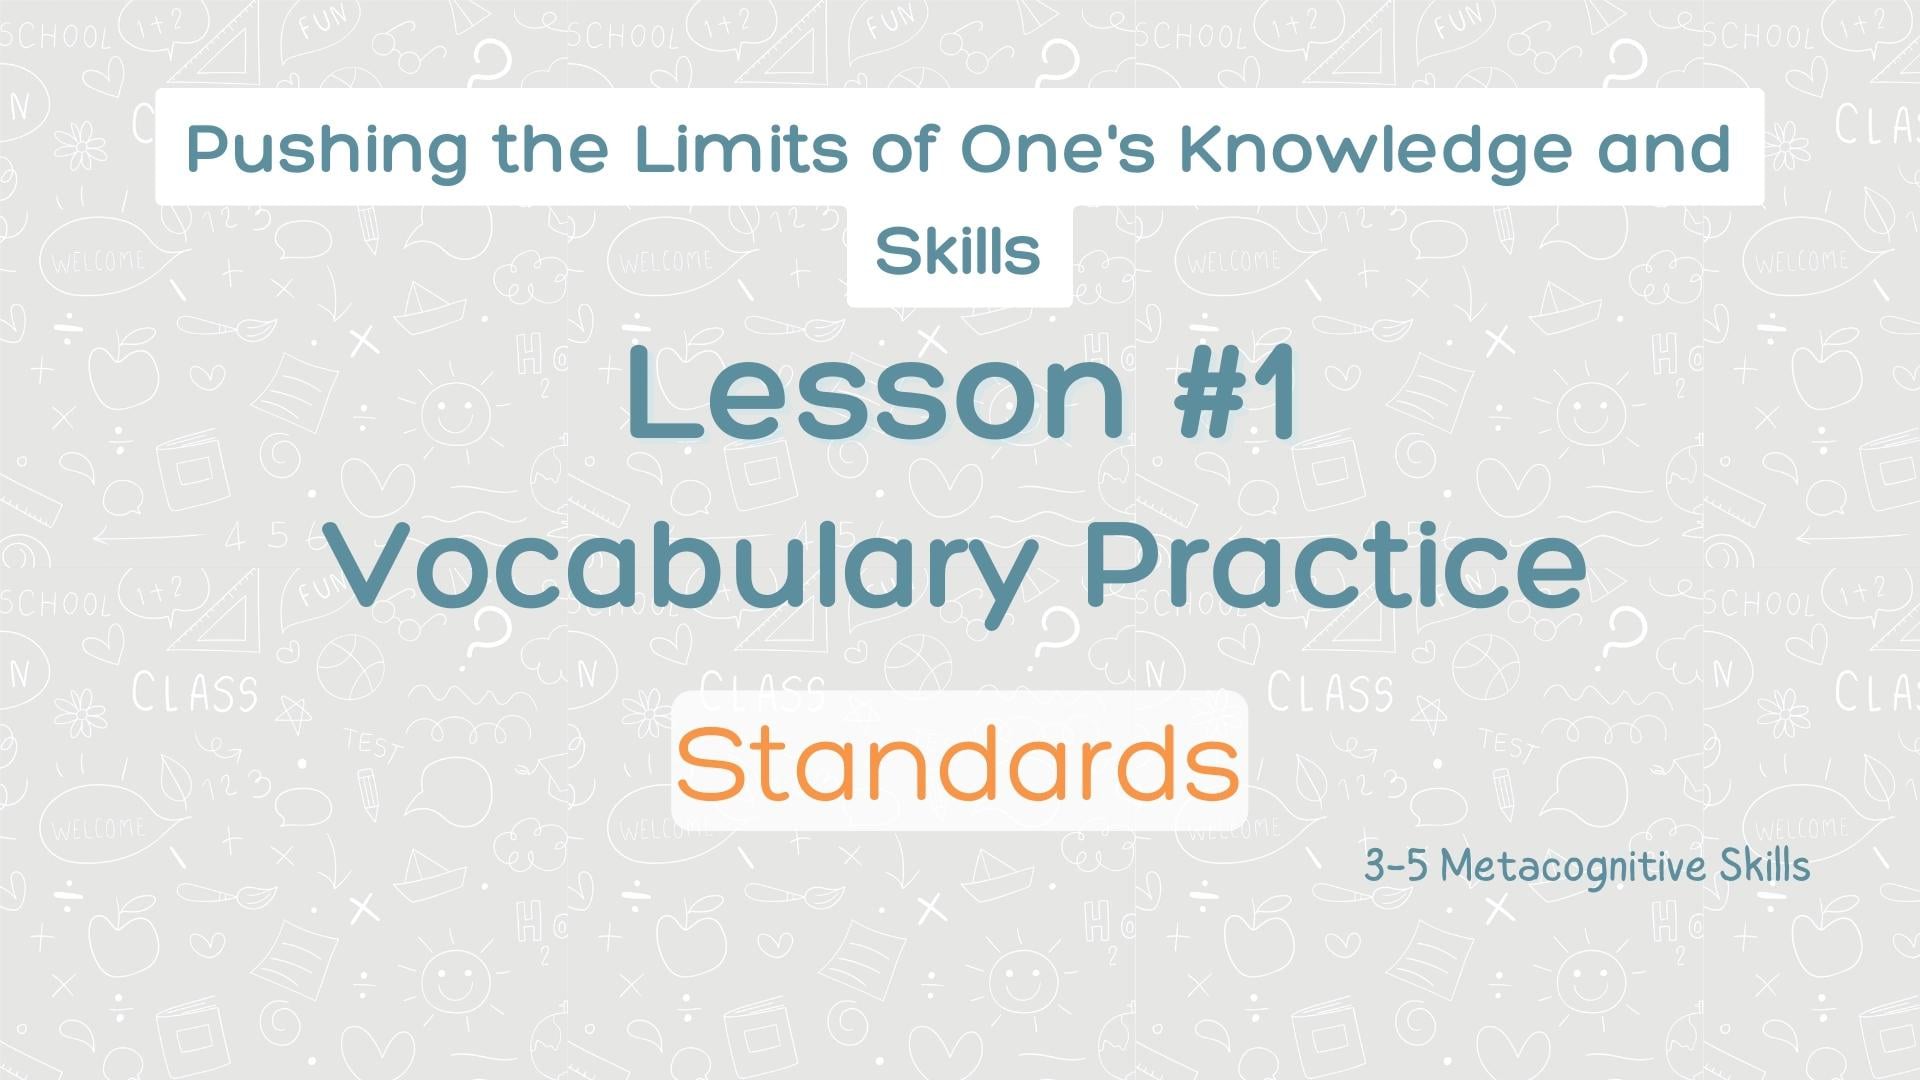 Lesson #1 Vocabulary Practice: Standards video thumbnail